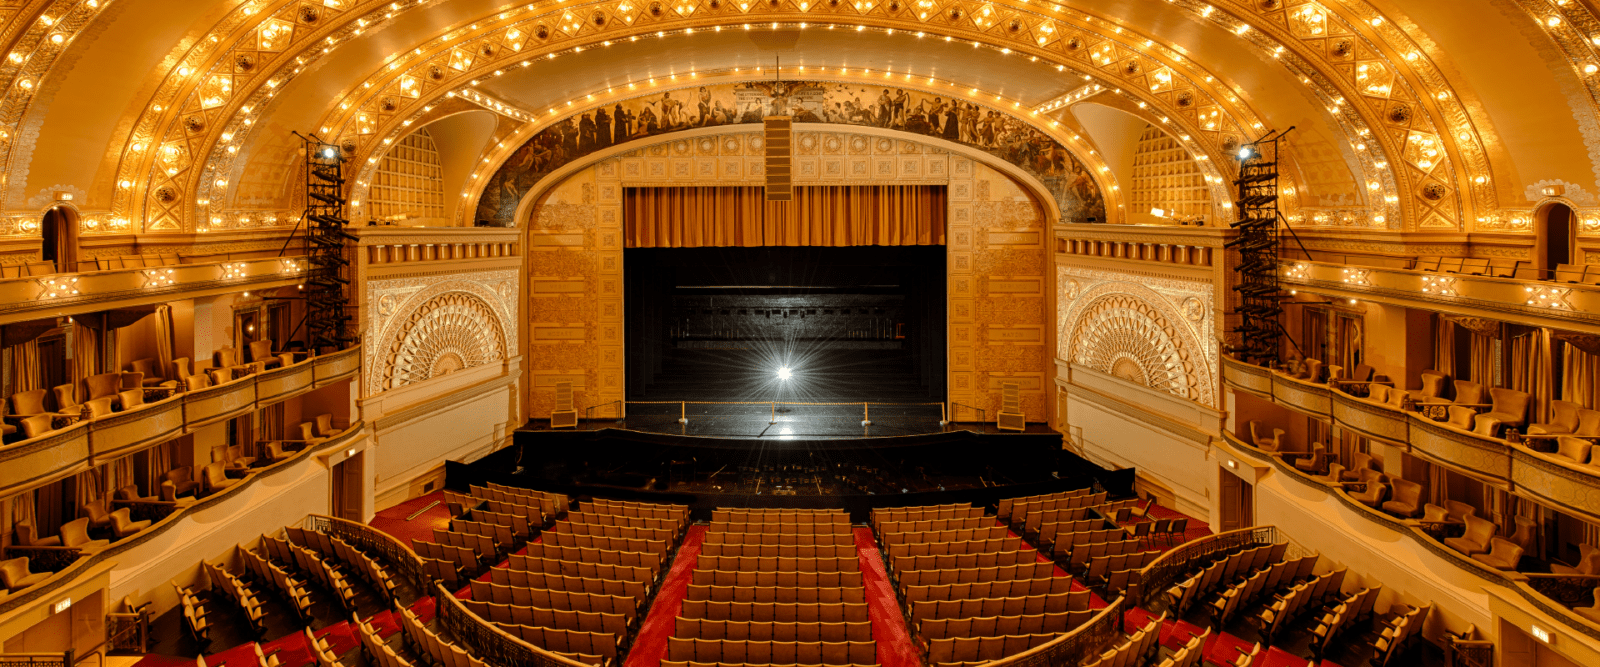 Performing arts theater